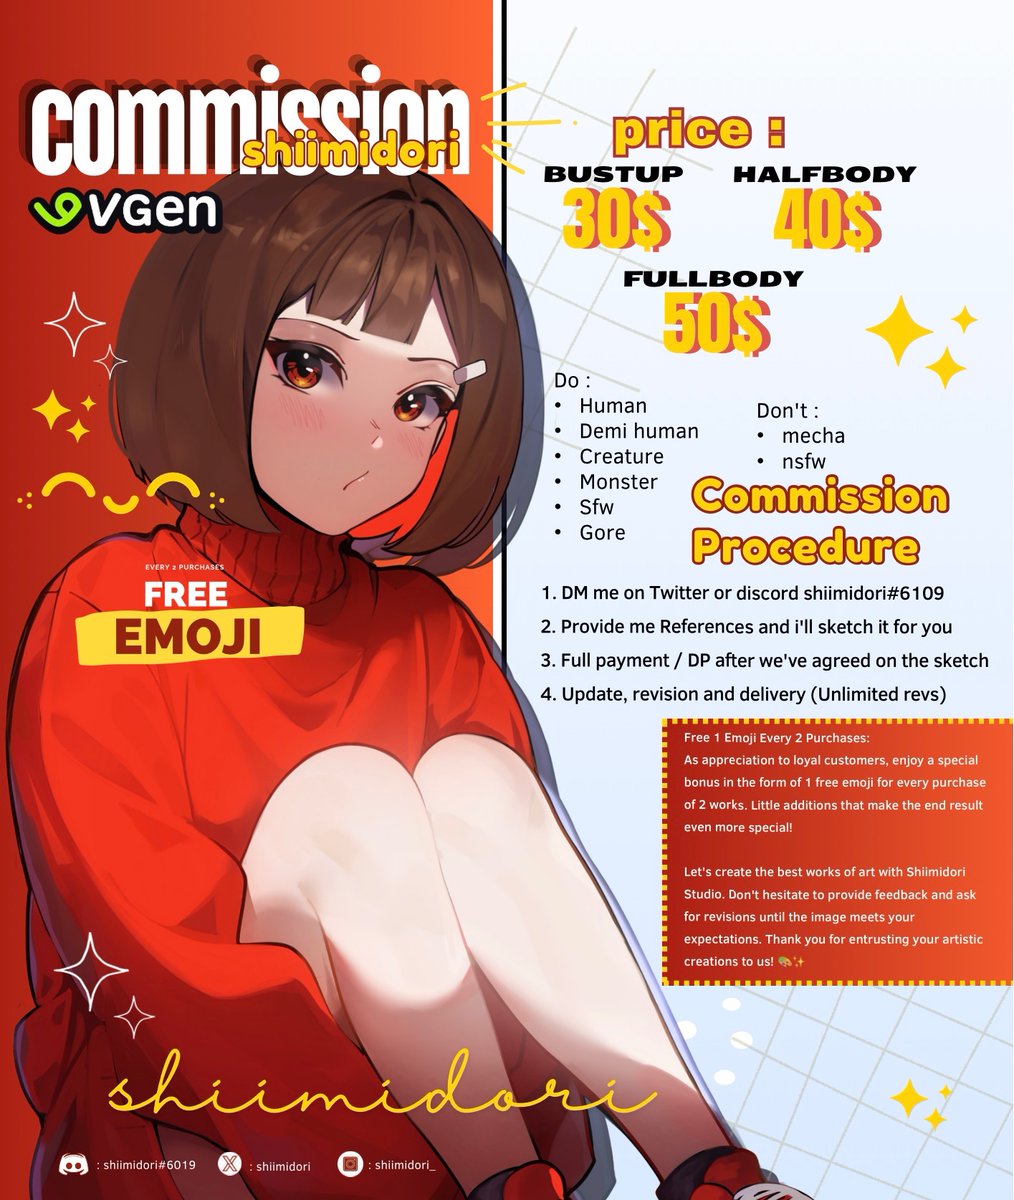 (Retweets are rlly appreciated as always!) Hello! I am open for commission again  don't hesitate to ask me anything at my DM or my Discord: shiimidori#6109 
#commissionsopen #commissionopen #commissions #Commission #commissionTH #commisionart #fanart #Fanarts #illustration